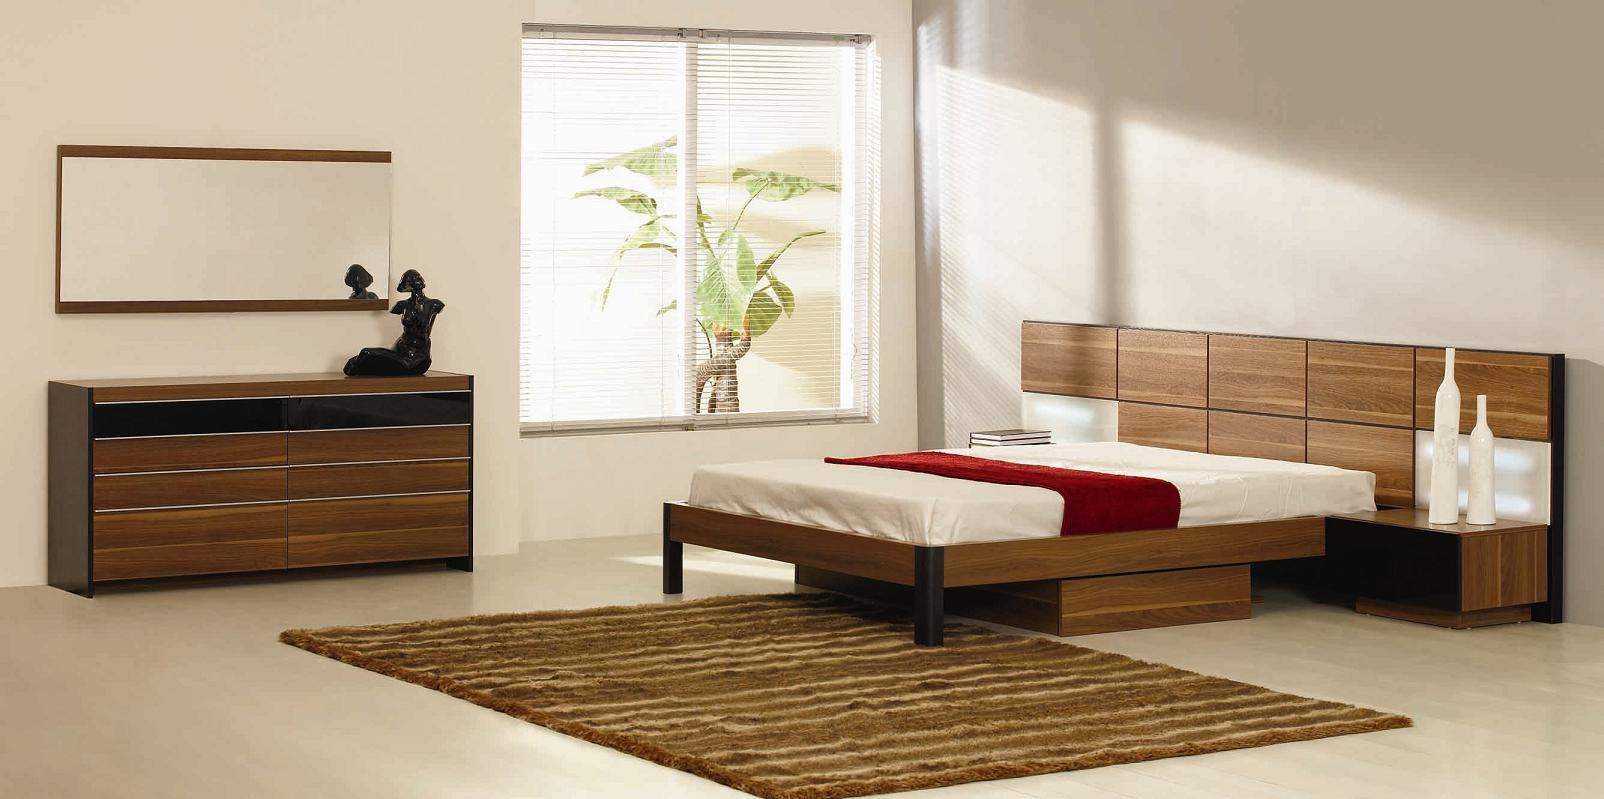 Italian Quality Wood Designer Bedroom Furniture Sets with Extra Storage - Click Image to Close